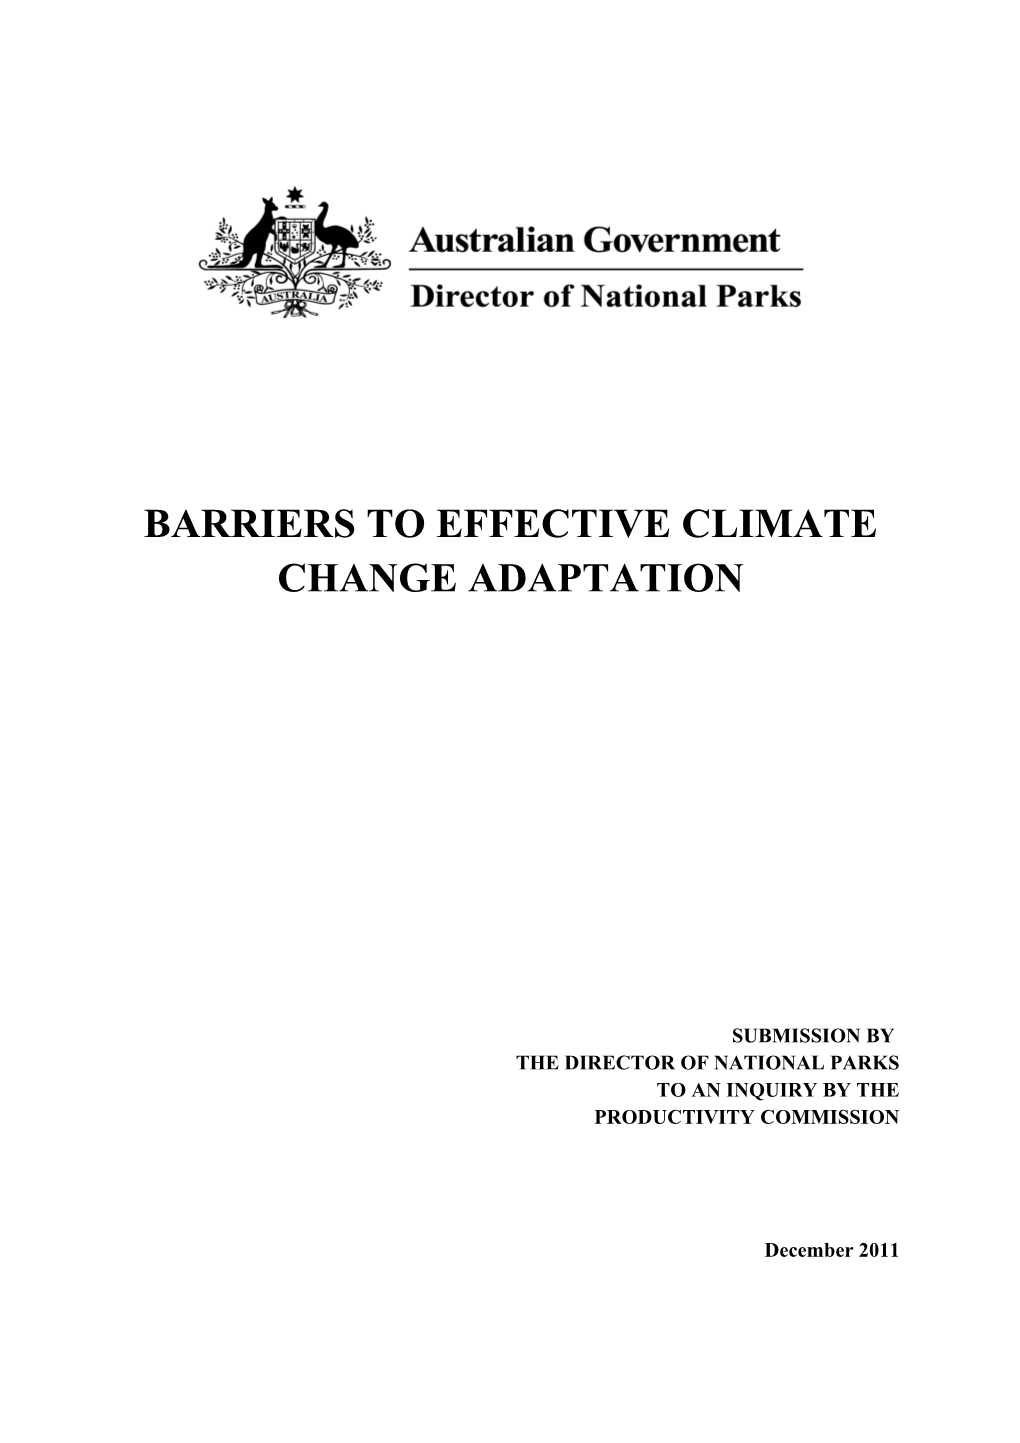 Submission 60 - Director of National Parks - Barriers to Effective Climate Change Adaption